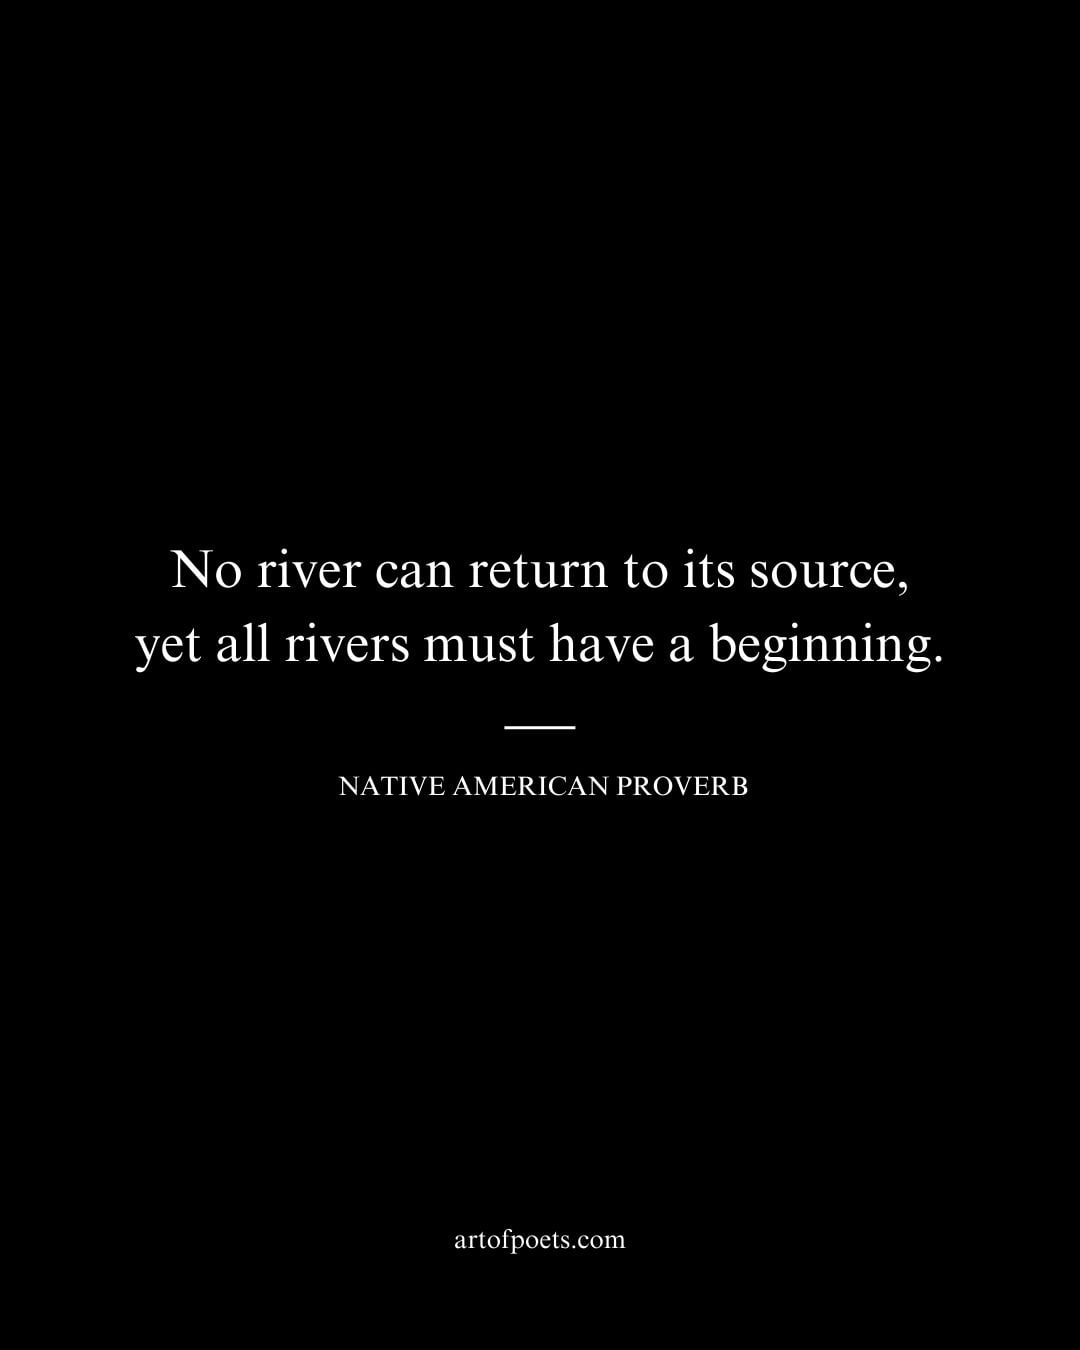 No river can return to its source yet all rivers must have a beginning